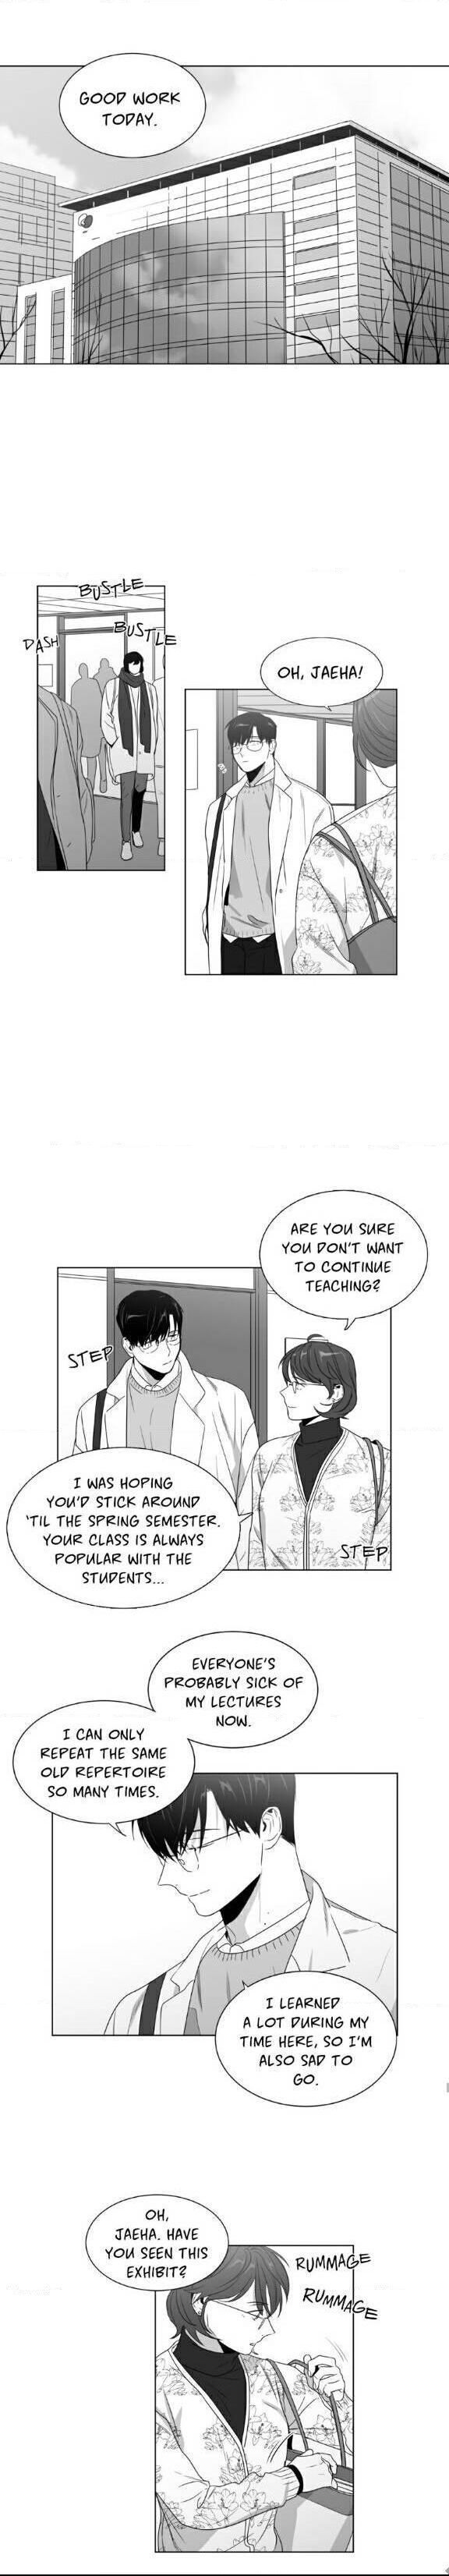 Lover Boy (Lezhin) Chapter 057 page 2